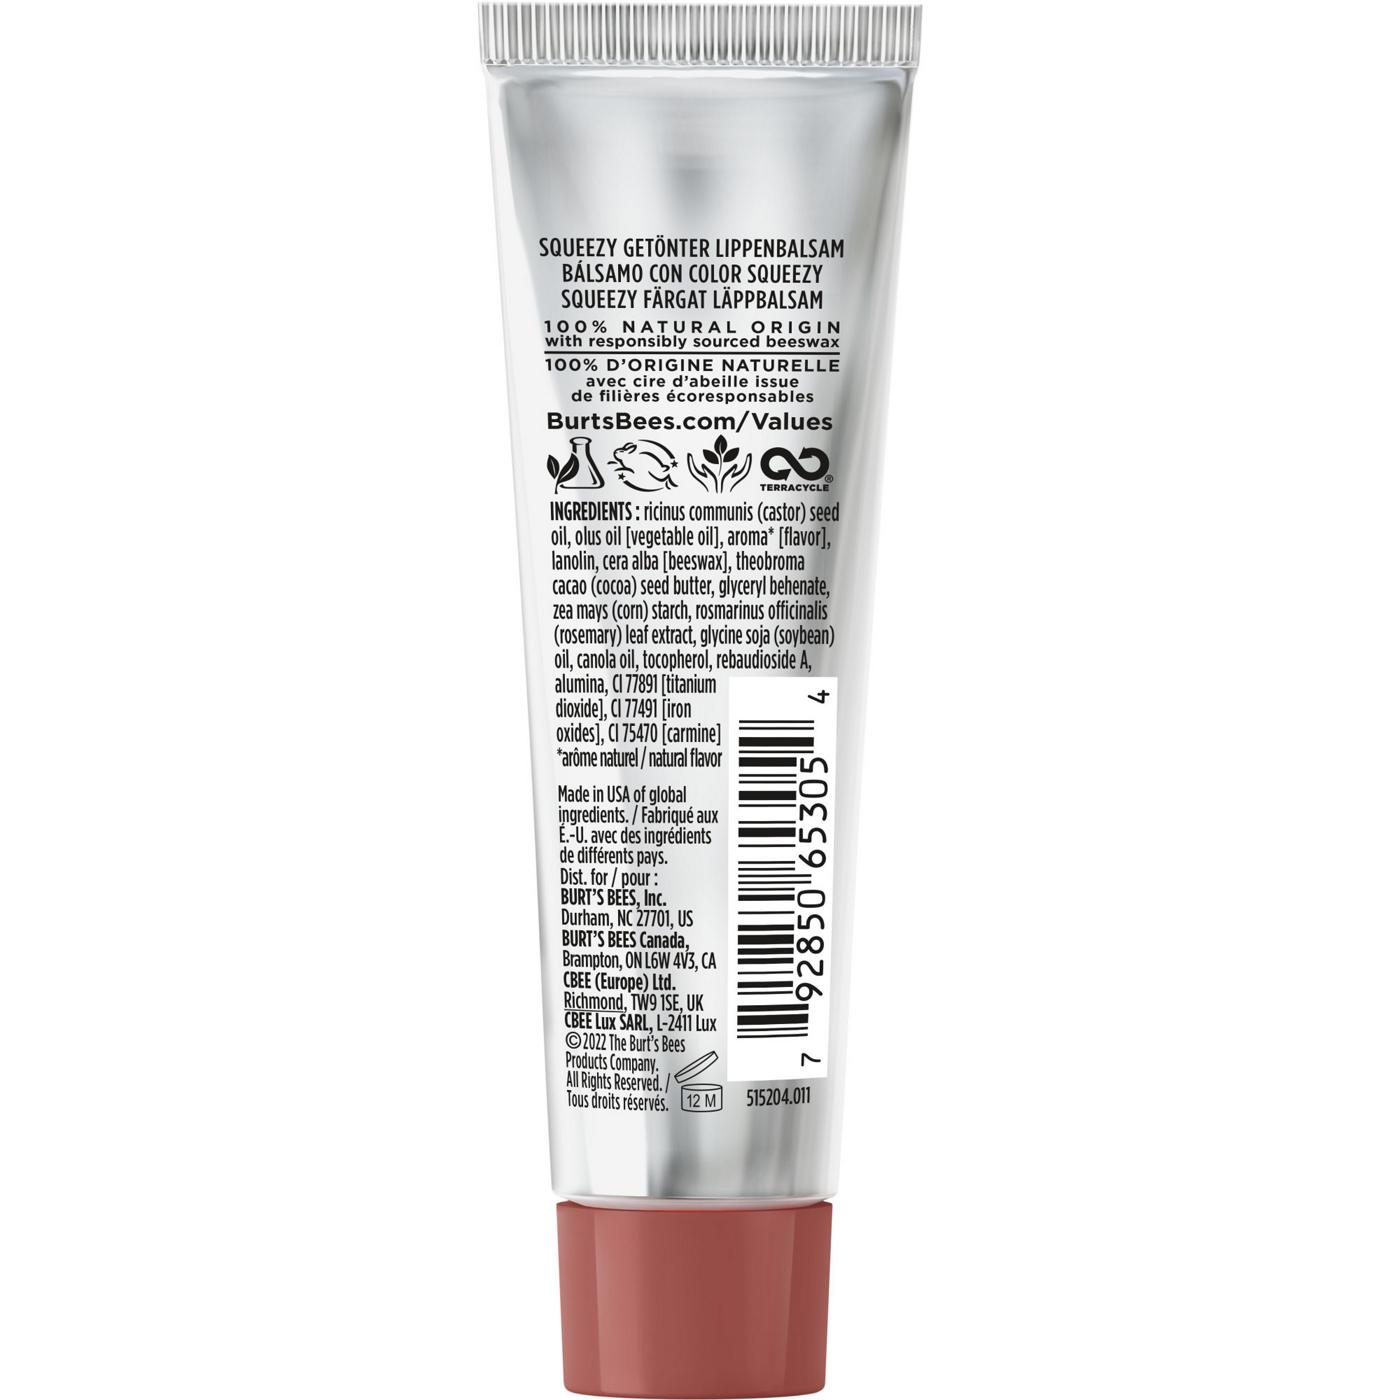 Burt's Bees Squeezy Tinted Balm - Cocoa Crush; image 6 of 7